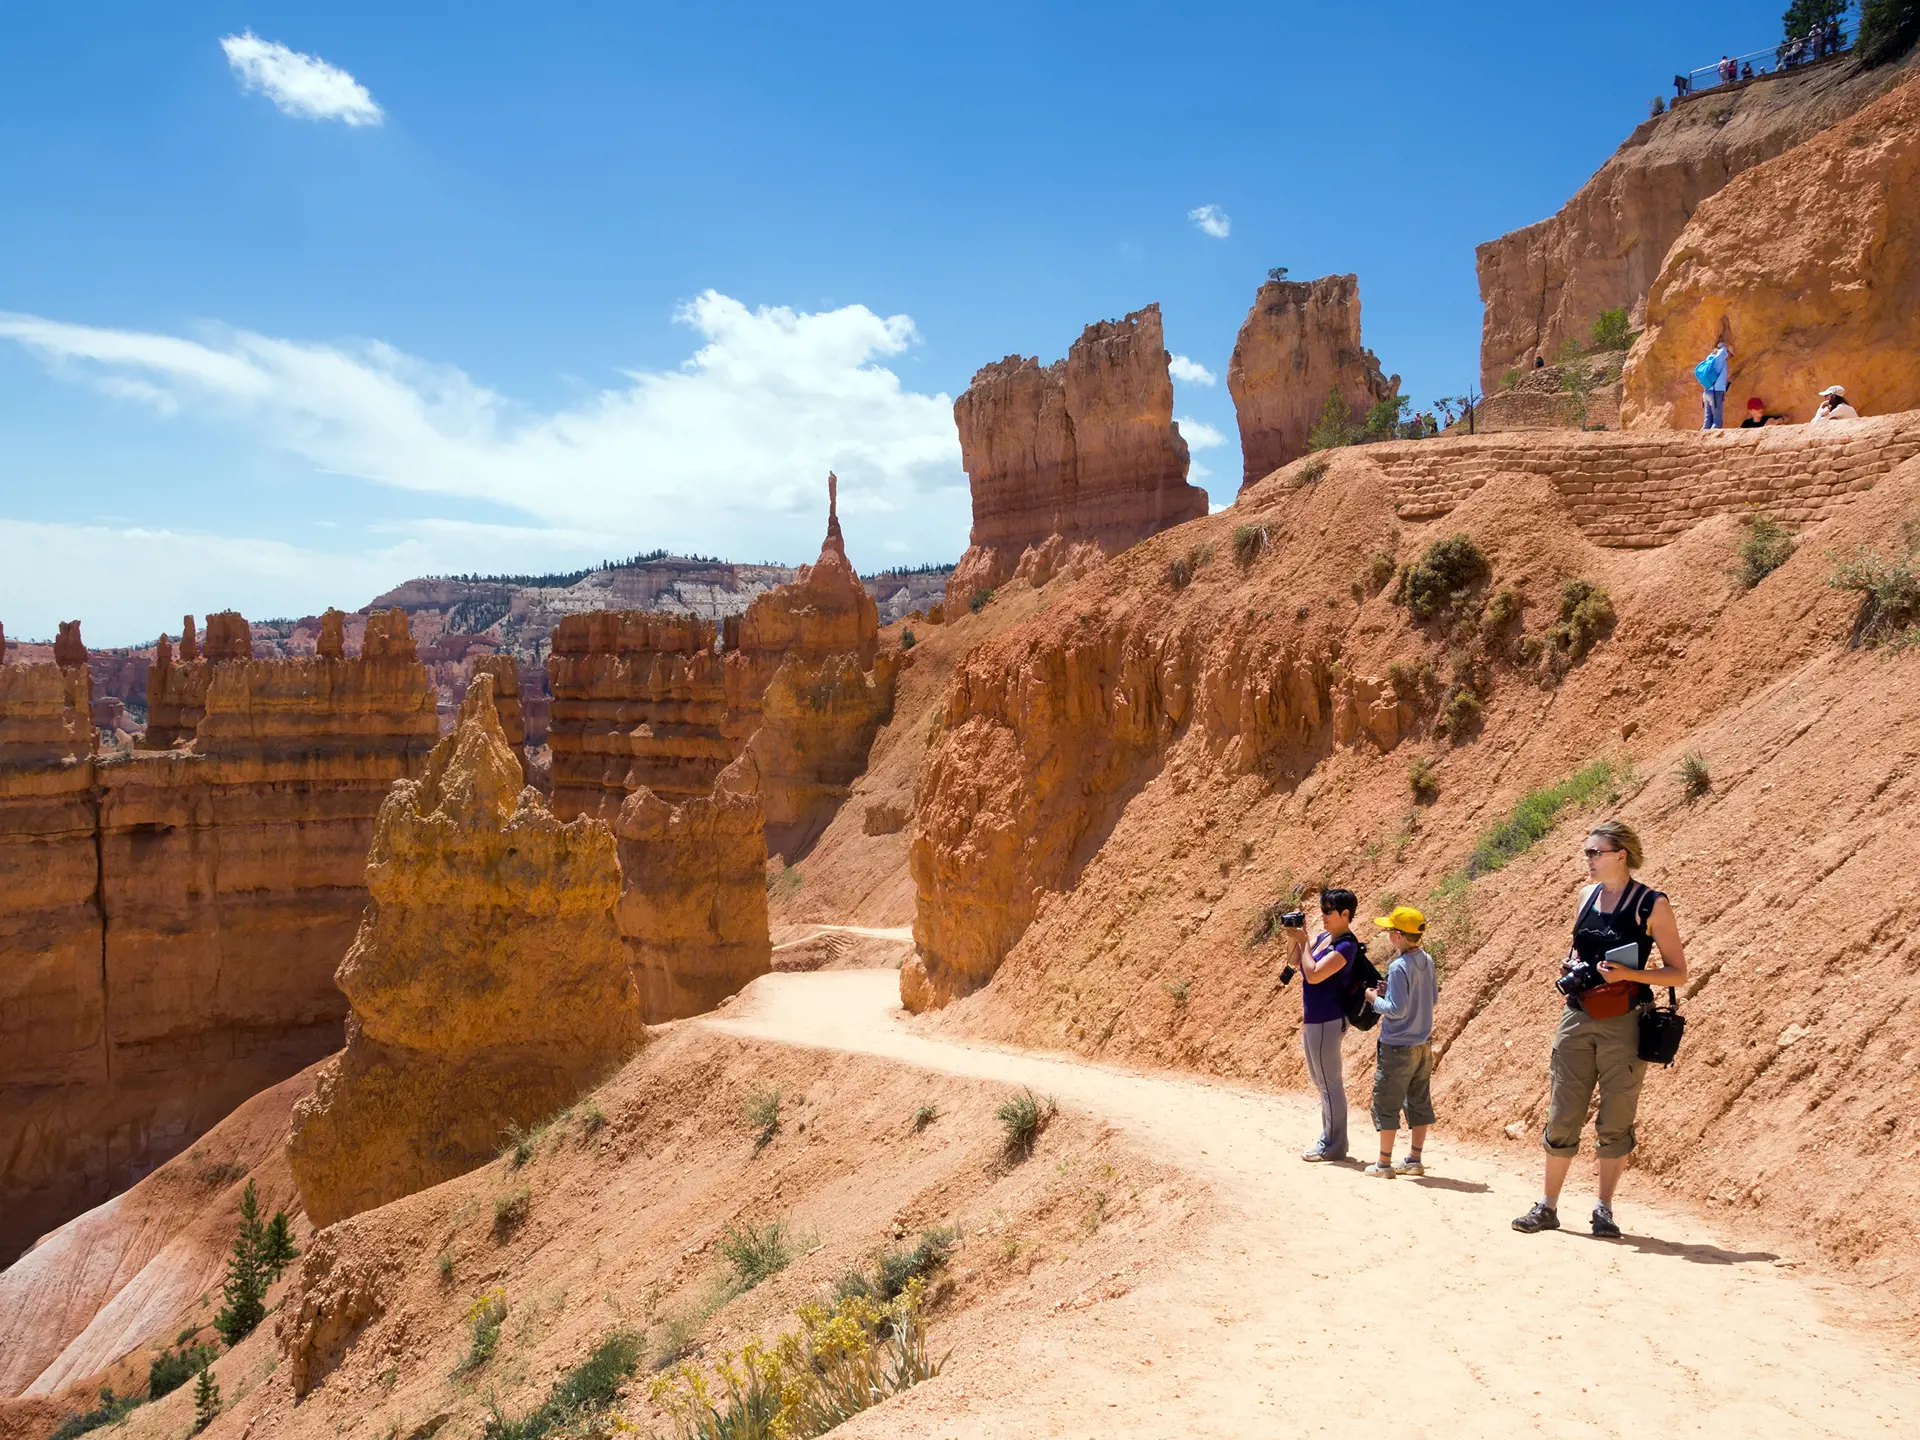 shutterstock_325312529 Adults with children on the trail. Bryce Canyon National Park, Utah, USA.jpg